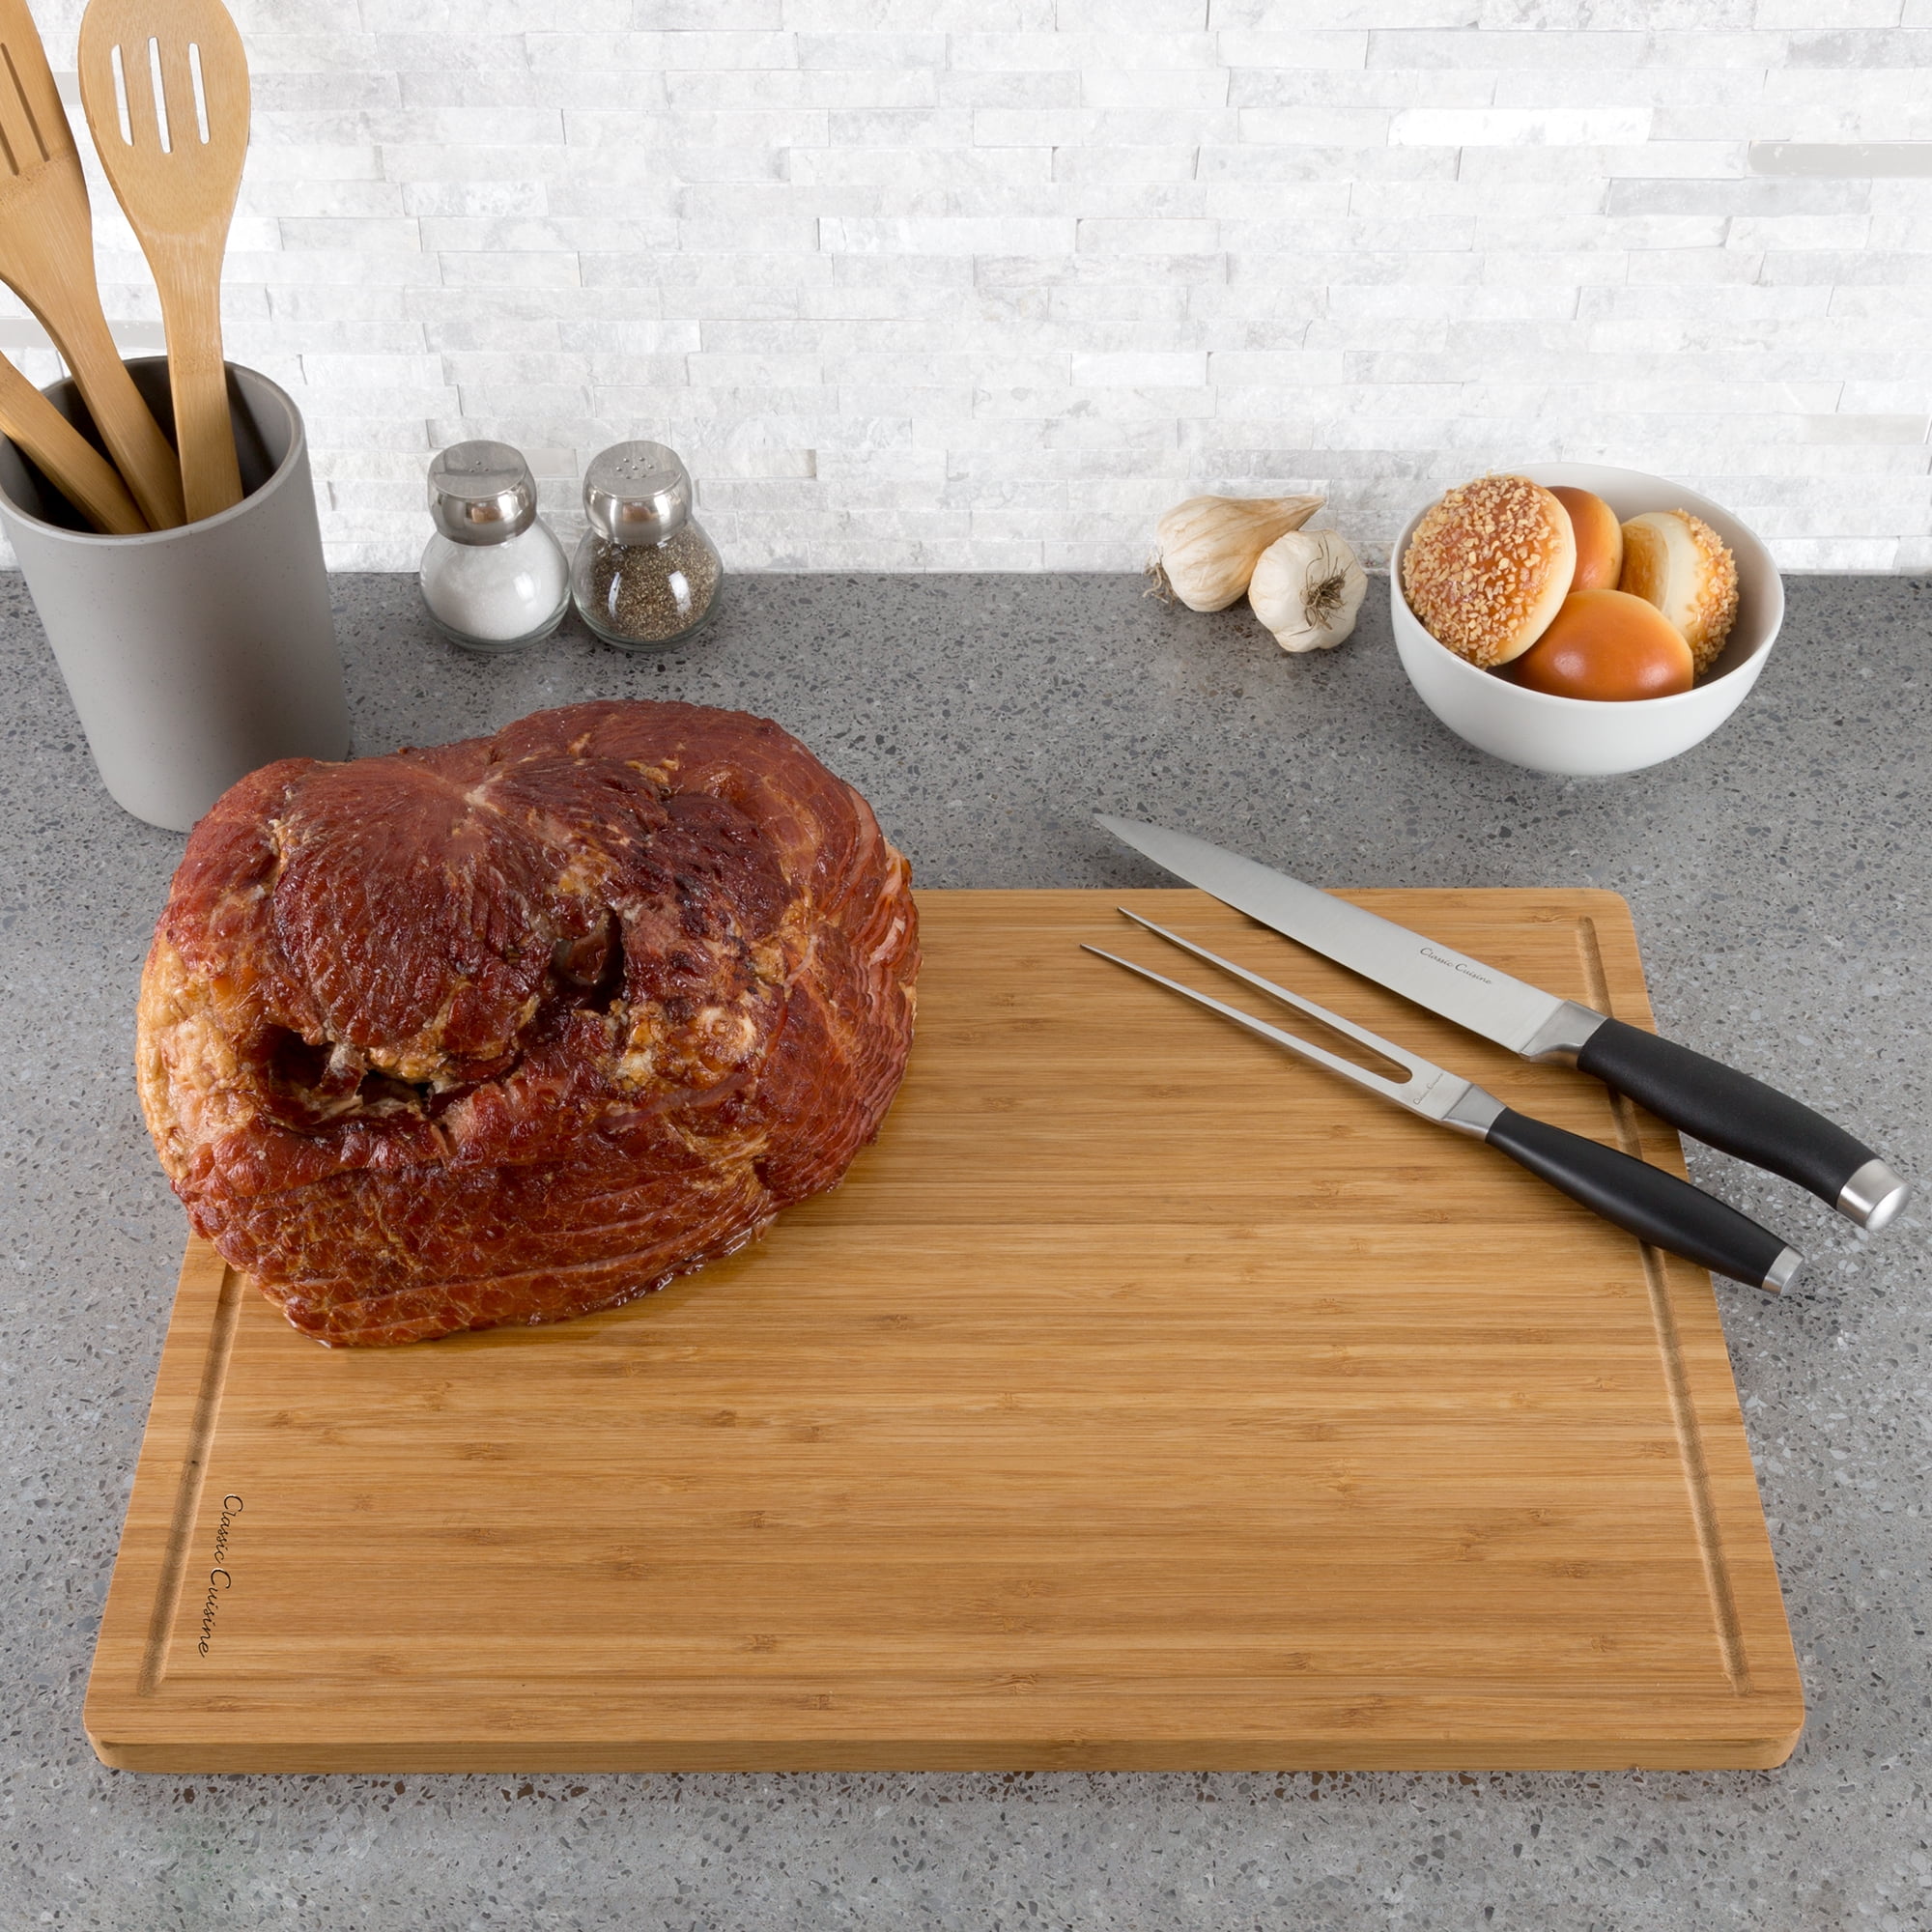 Classic Sink Accessory - 15 Bamboo Cutting Board with Silicone